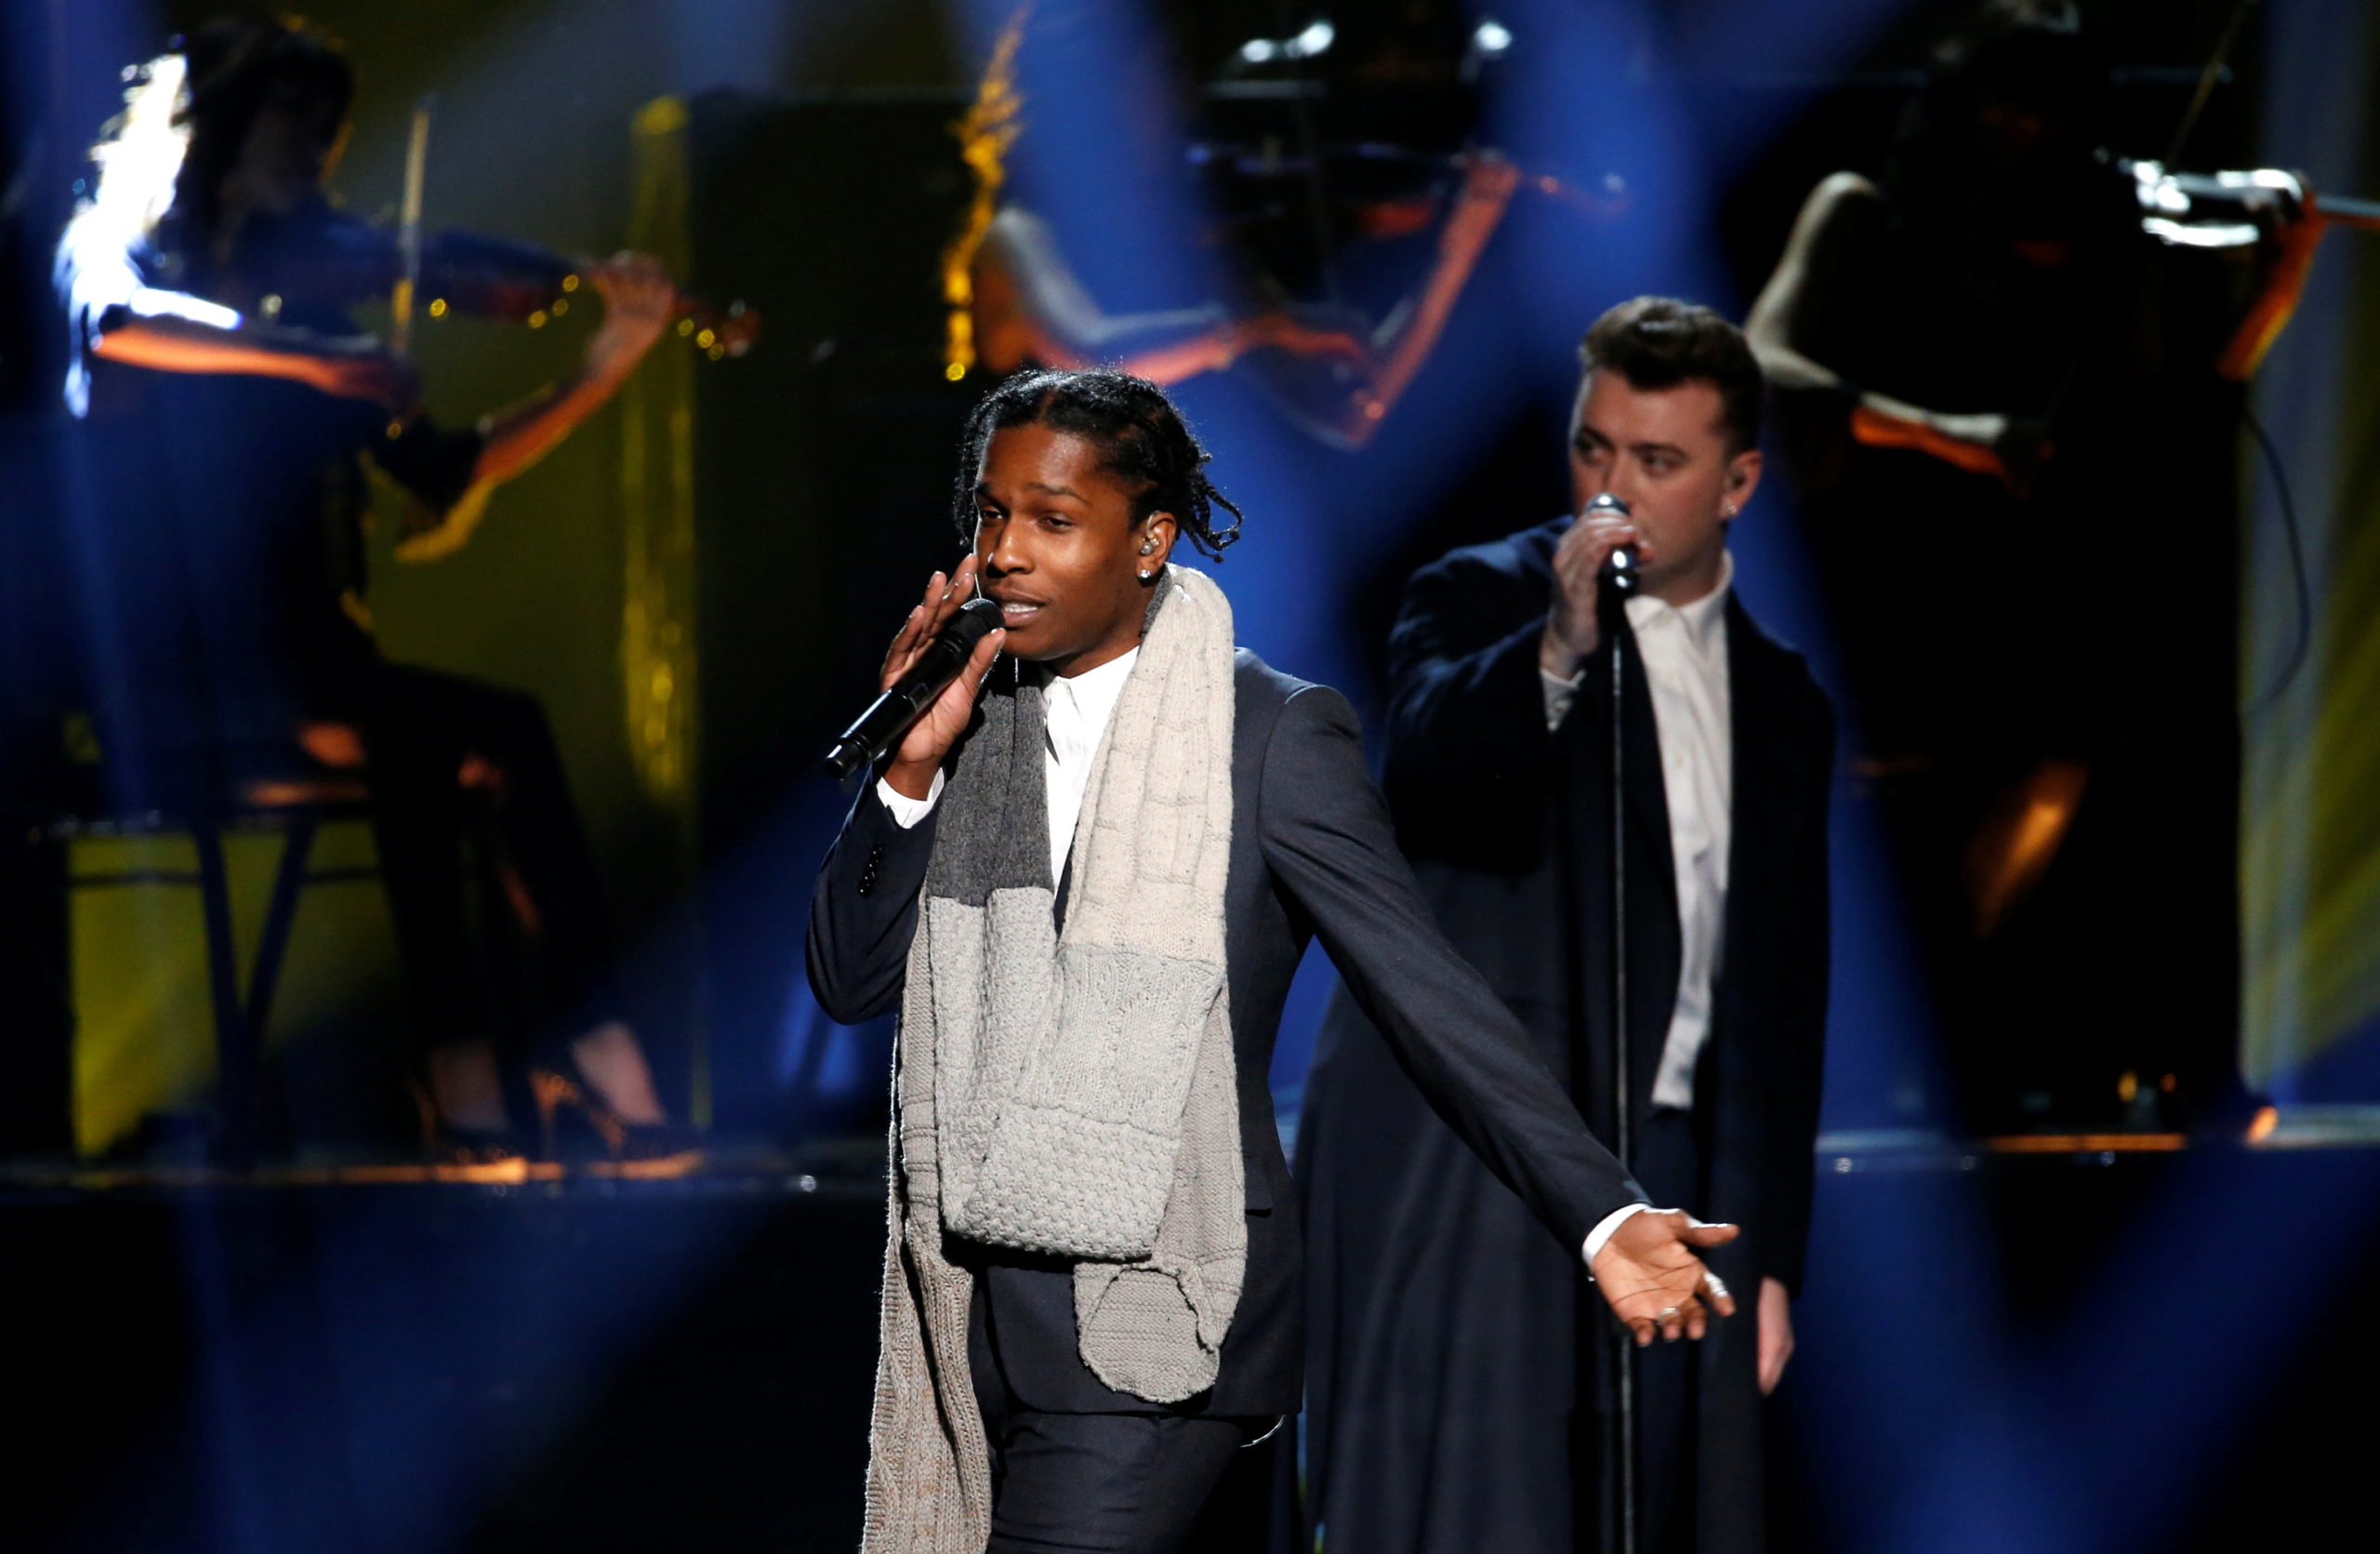 A$AP Rocky performs "I'm Not the Only One" with Sam Smith (R) during the 42nd American Music Awards in Los Angeles, California November 23, 2014.  REUTERS/Mario Anzuoni